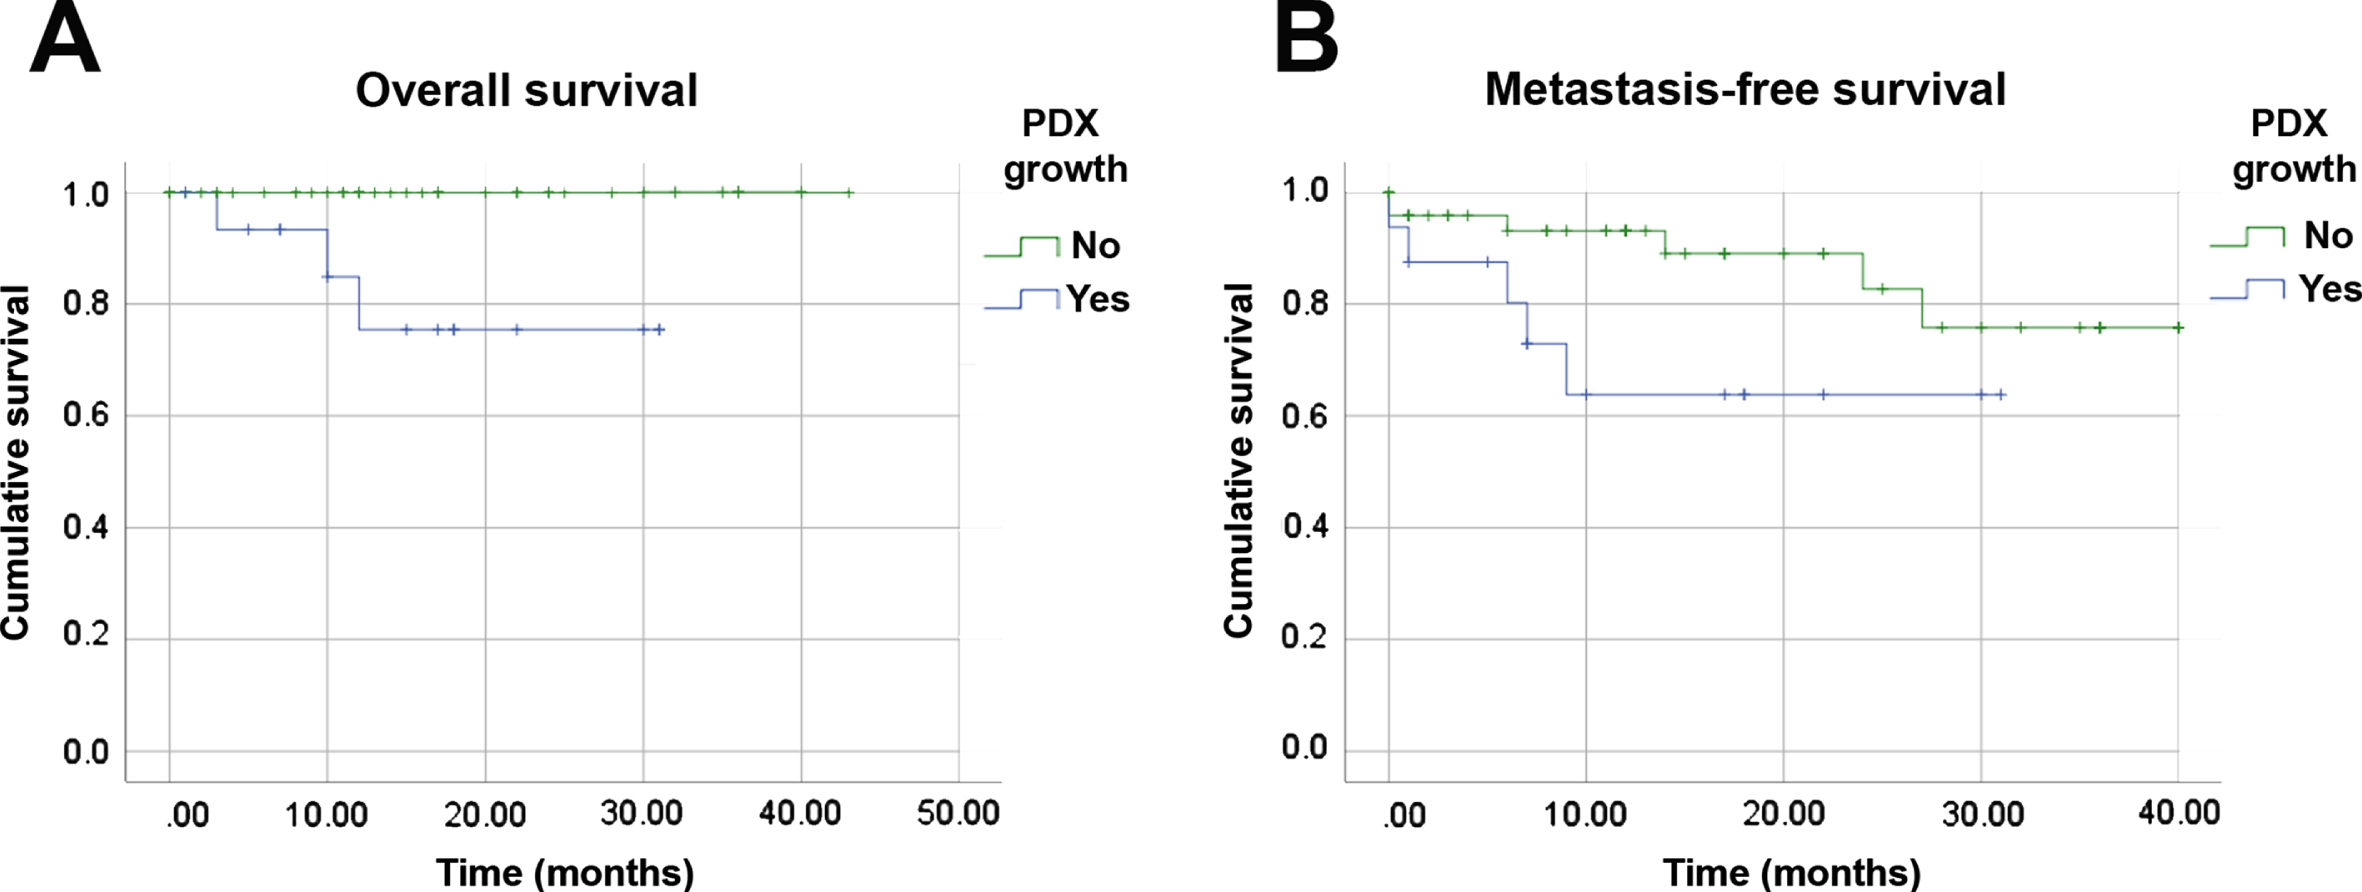 Tumor engraftment capacity is a prognostic factor in RCC. Kaplan-Meier analyses of overall (A) and metastasis-free (B) survivals of 70 RCC patients related to engraftment of orthotopic PDX. All histologic subtypes and clinical stages were included.